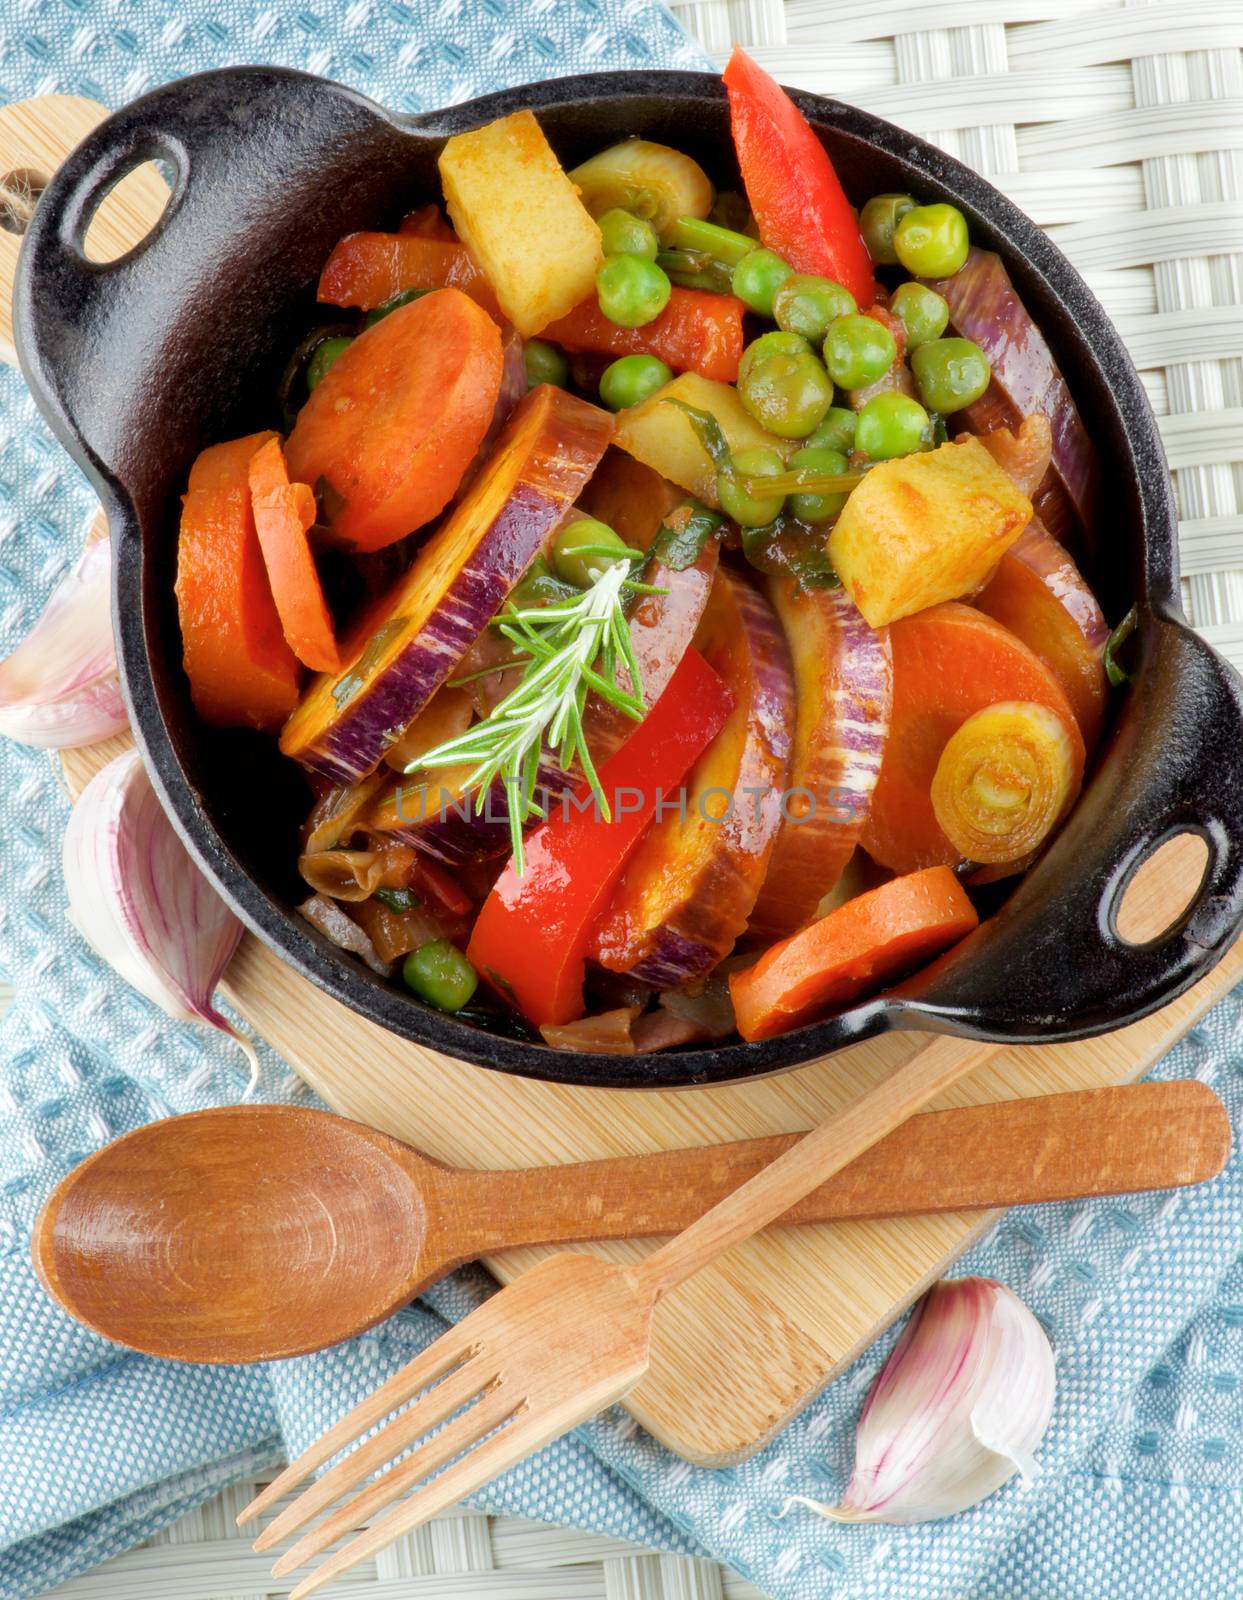 Colorful Vegetables Ragout by zhekos